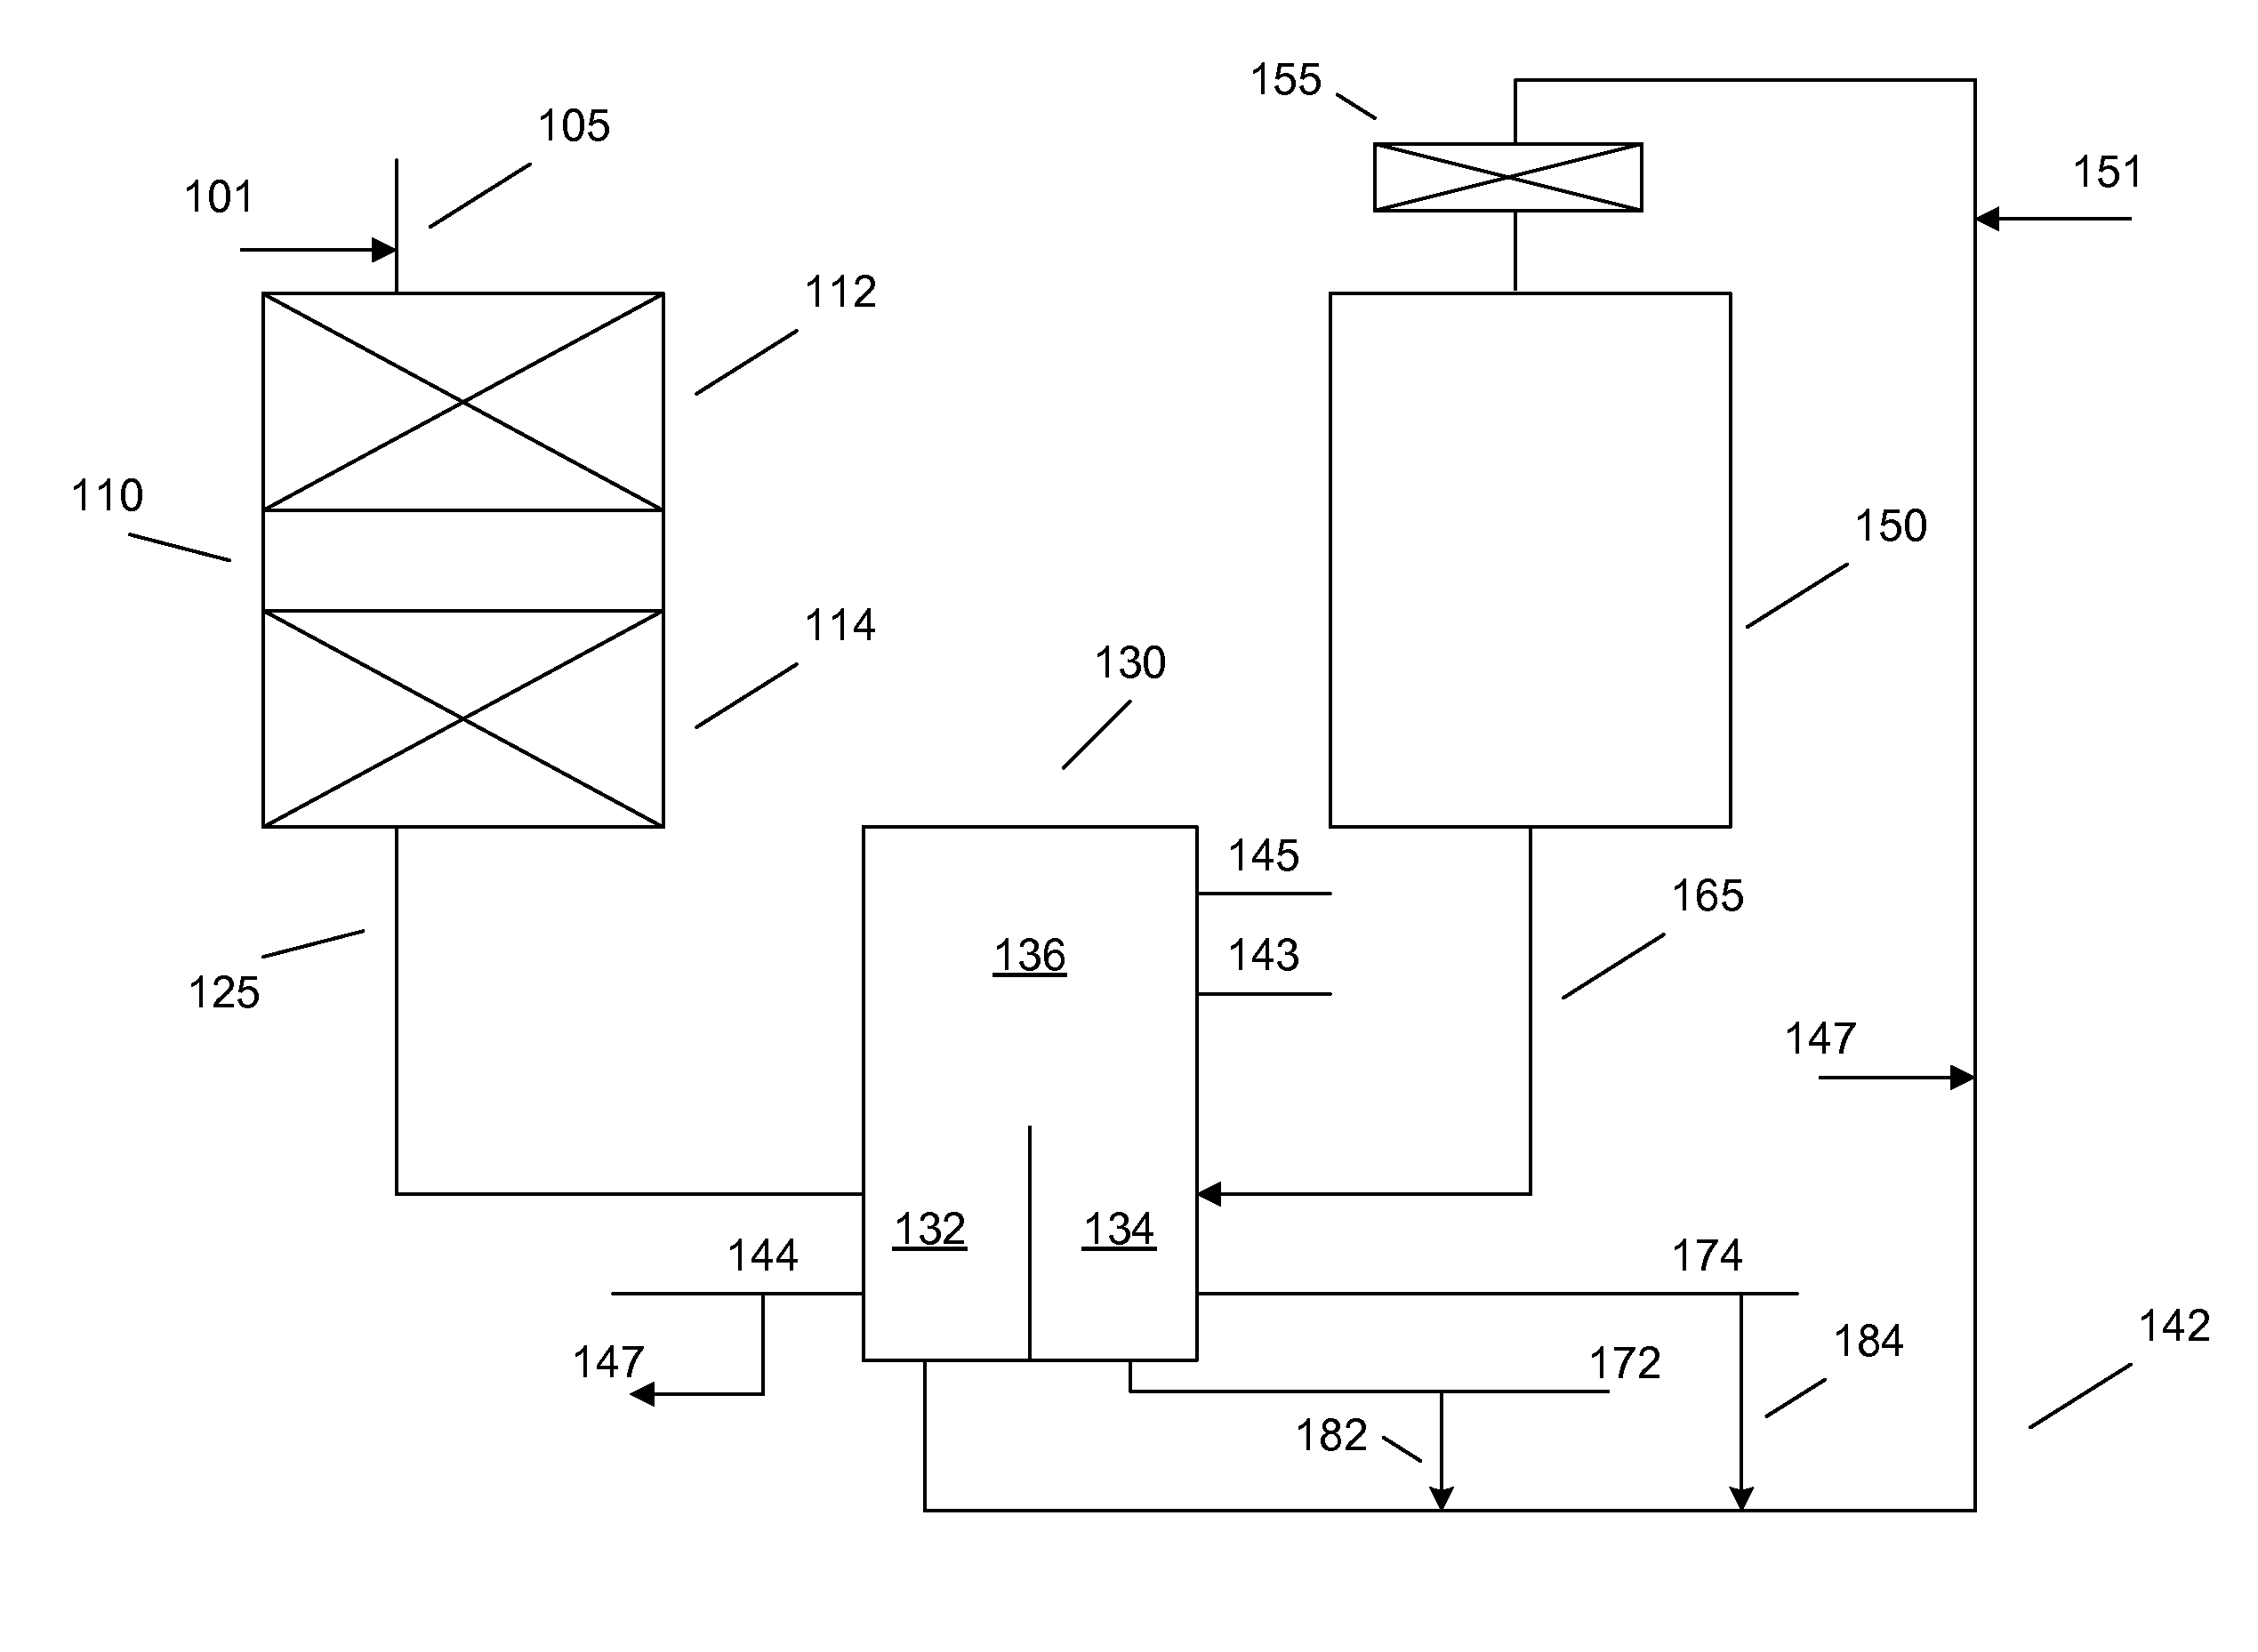 Two stage hydroprocessing with divided wall column fractionator